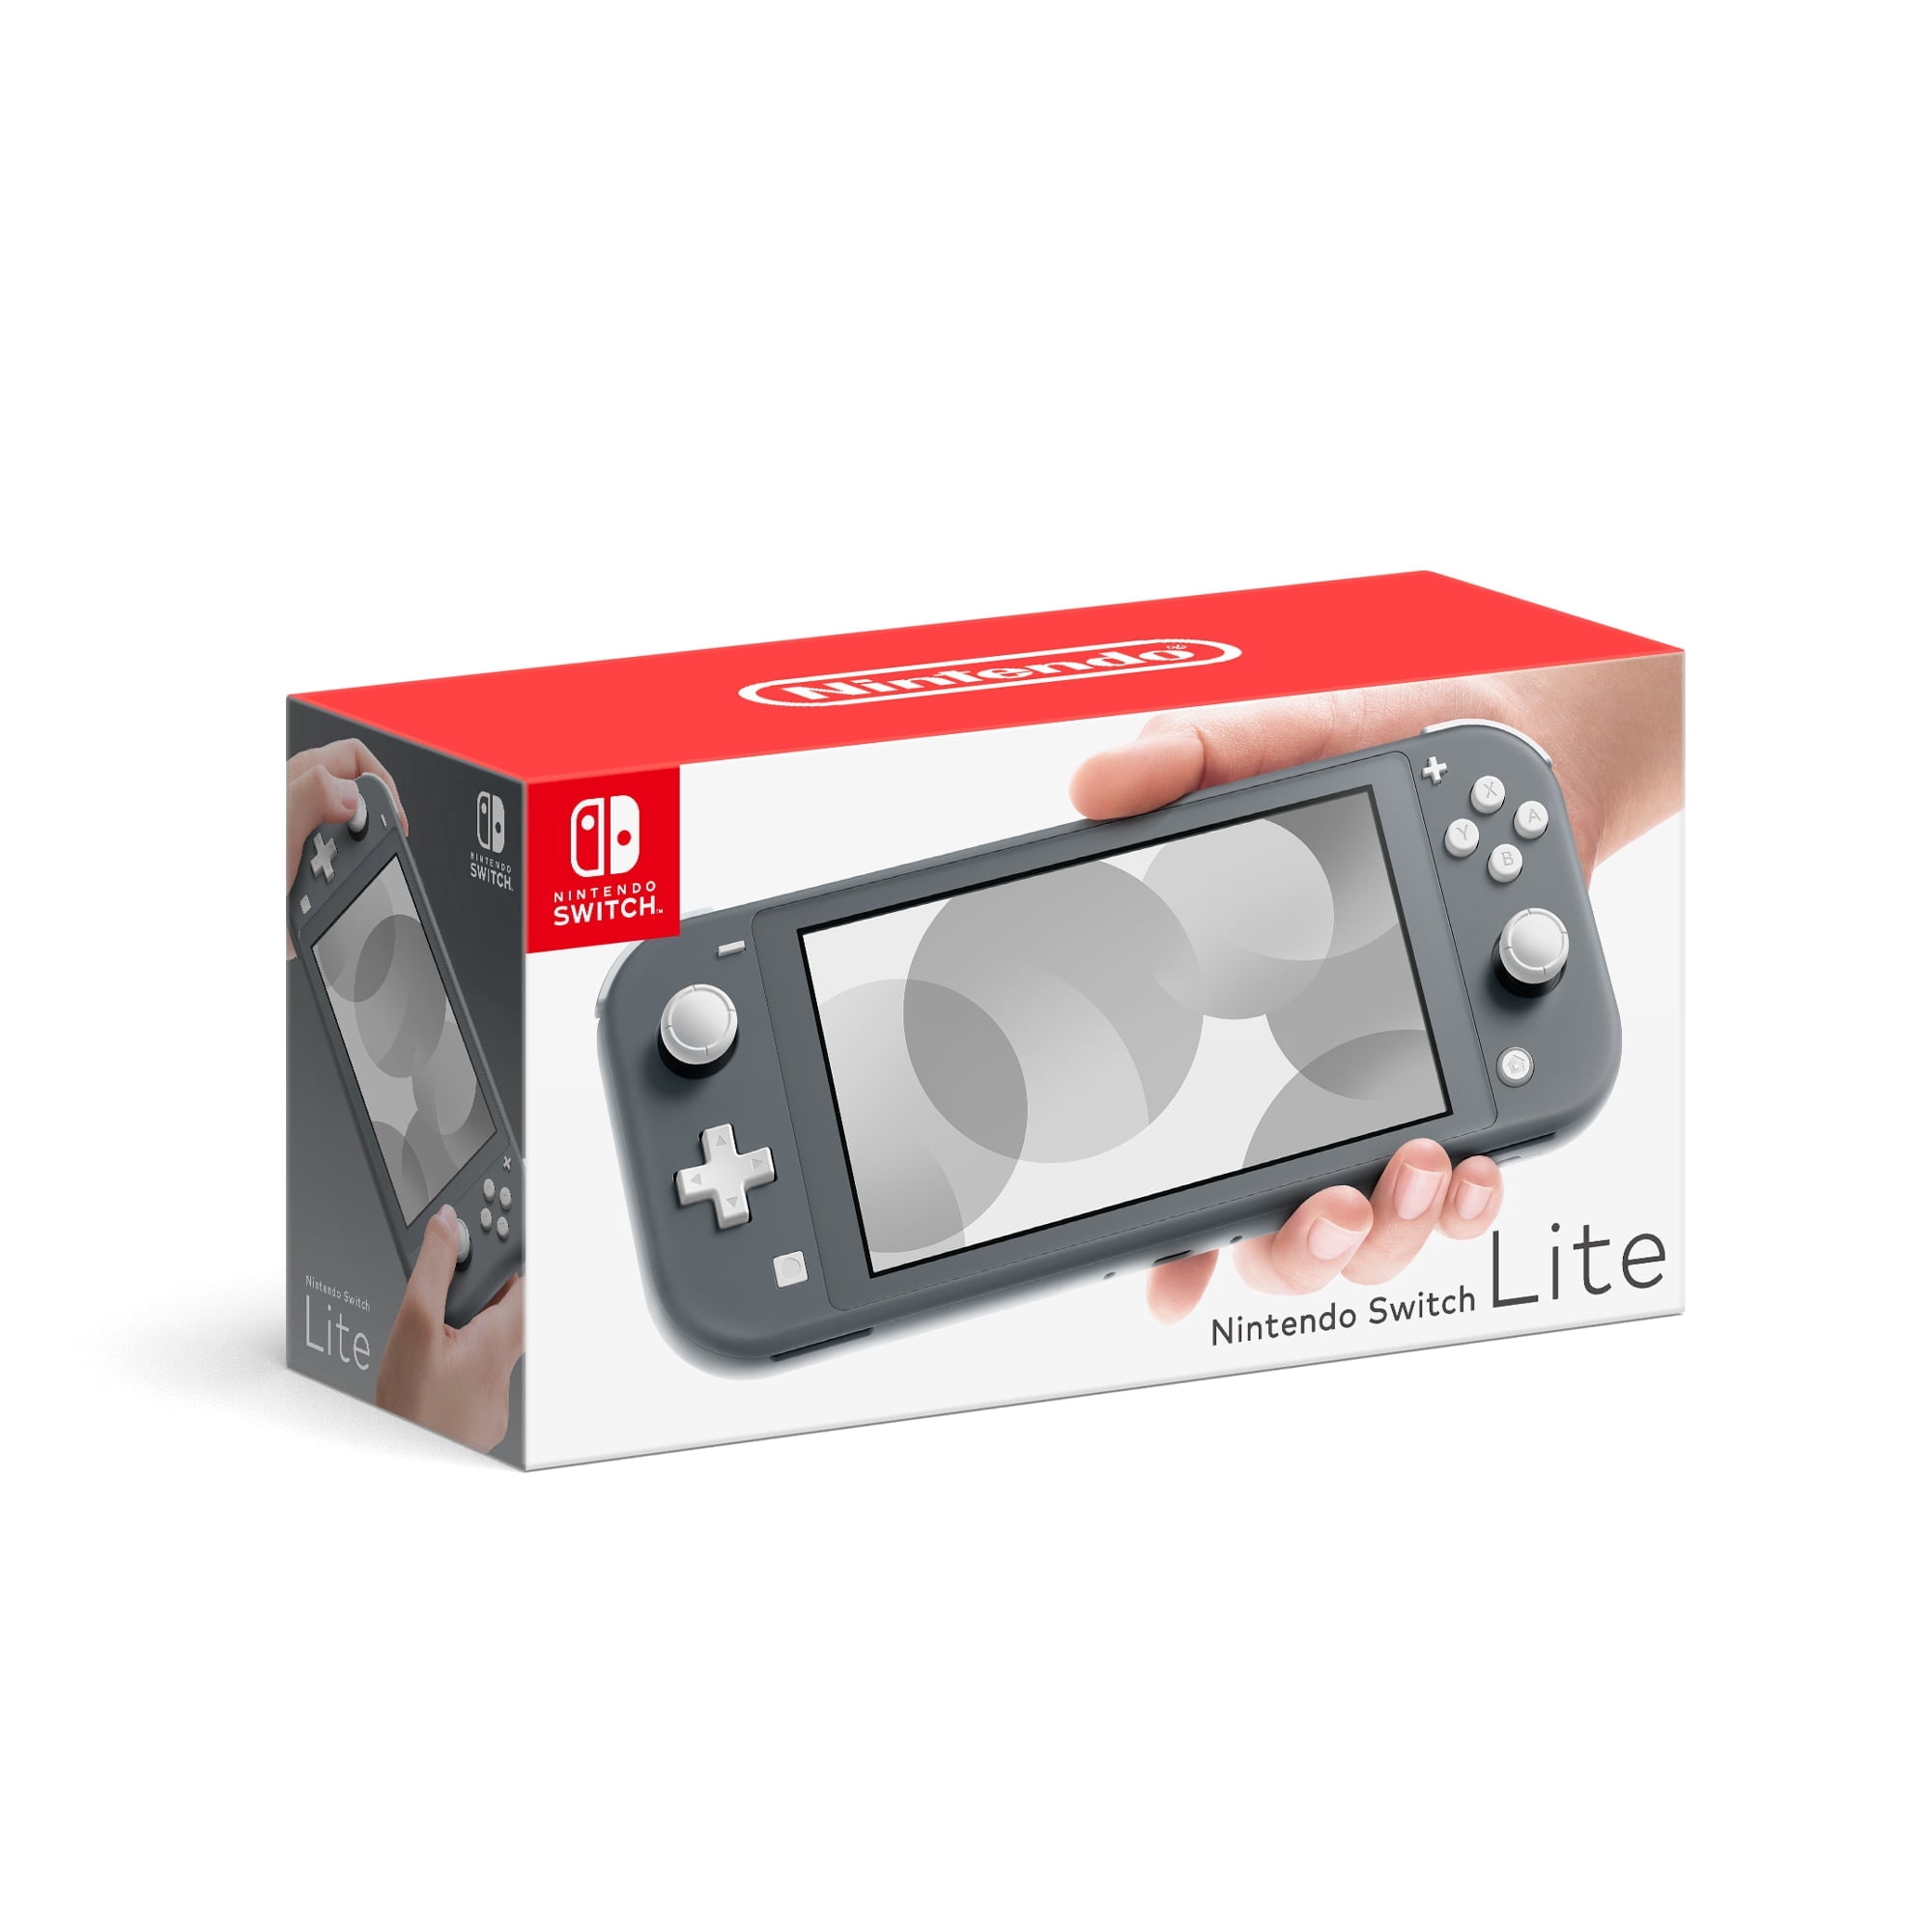 Nintendo Switch Lite Console, Blue - International Spec (Functional in US)  NEW 